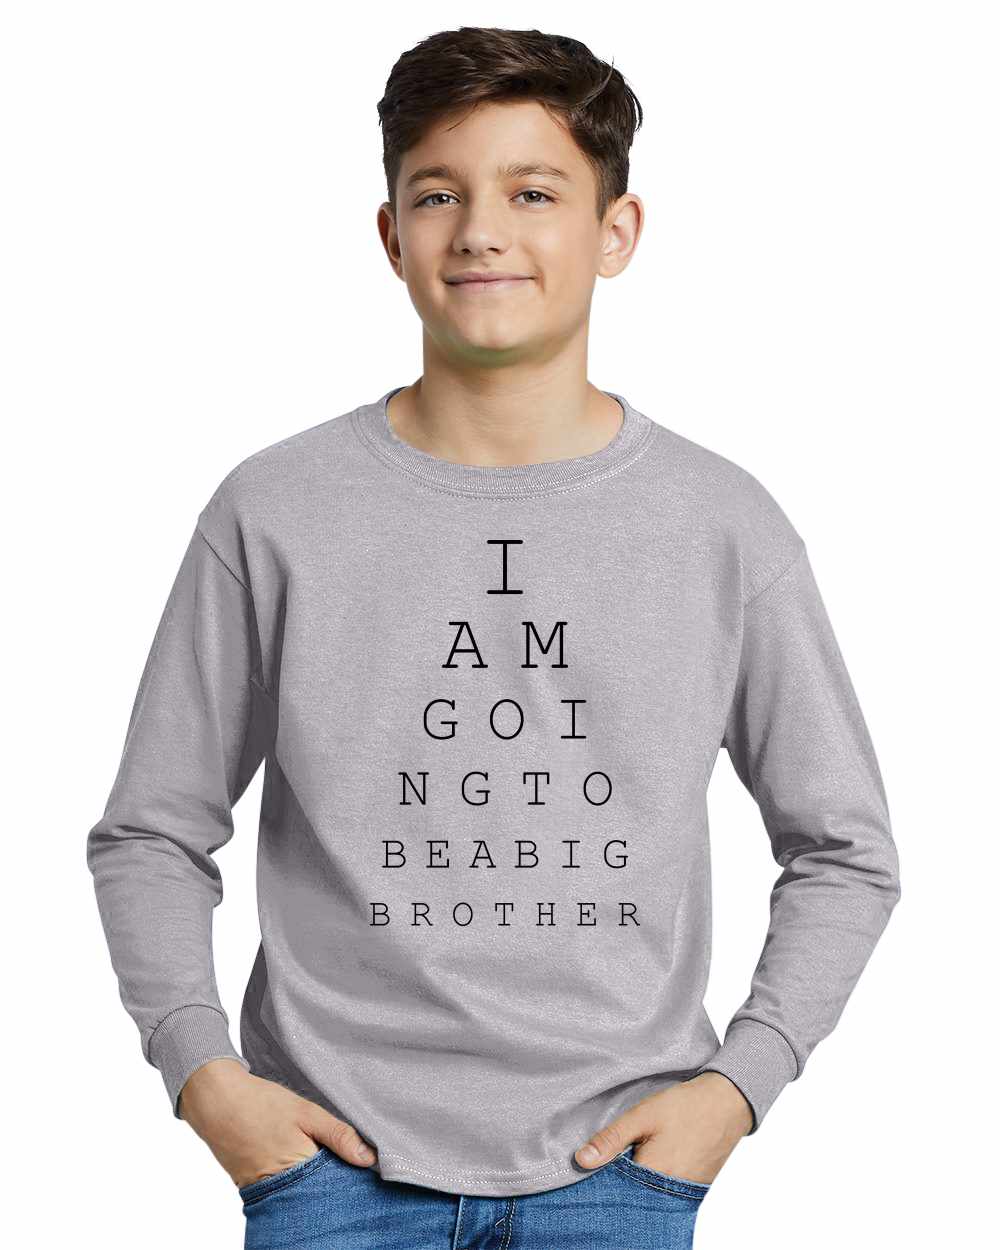 I AM GOING TO BE BIG BROTHER EYE CHART on Youth Long Sleeve Shirt